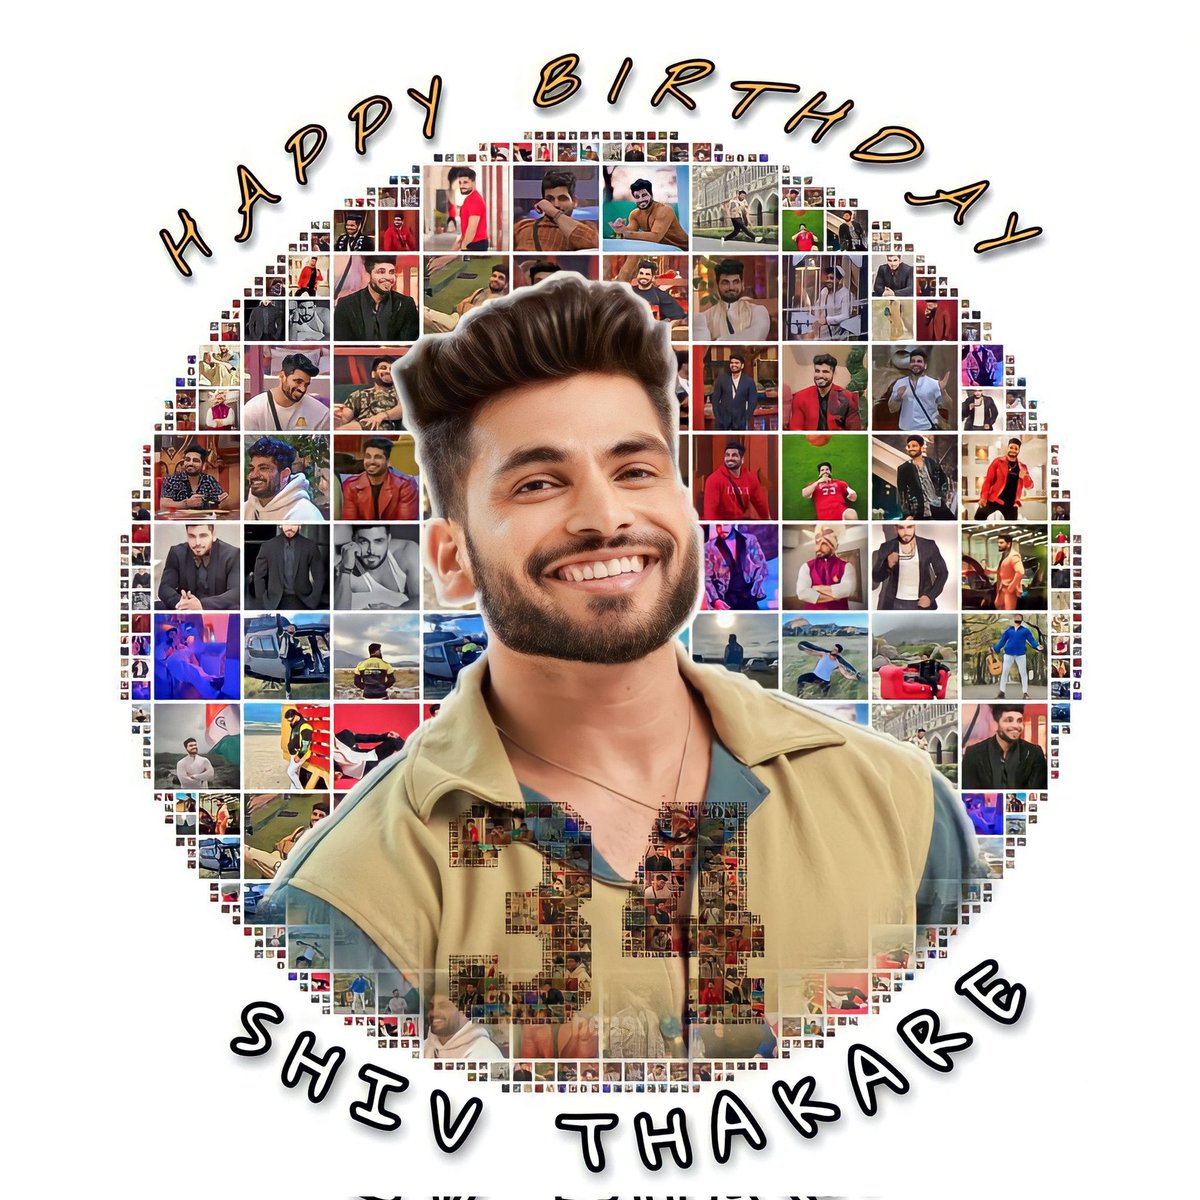 #ShivKiSena !! 

To celebrate Shiv’s birthday together, let’s change our DP to this one. ❤️

Also be Ready for our Birthday trend tonight!! 🥳💯

#ShivThakare #HappyBirthdayShivThakare 
#HappyBirthdayShiv